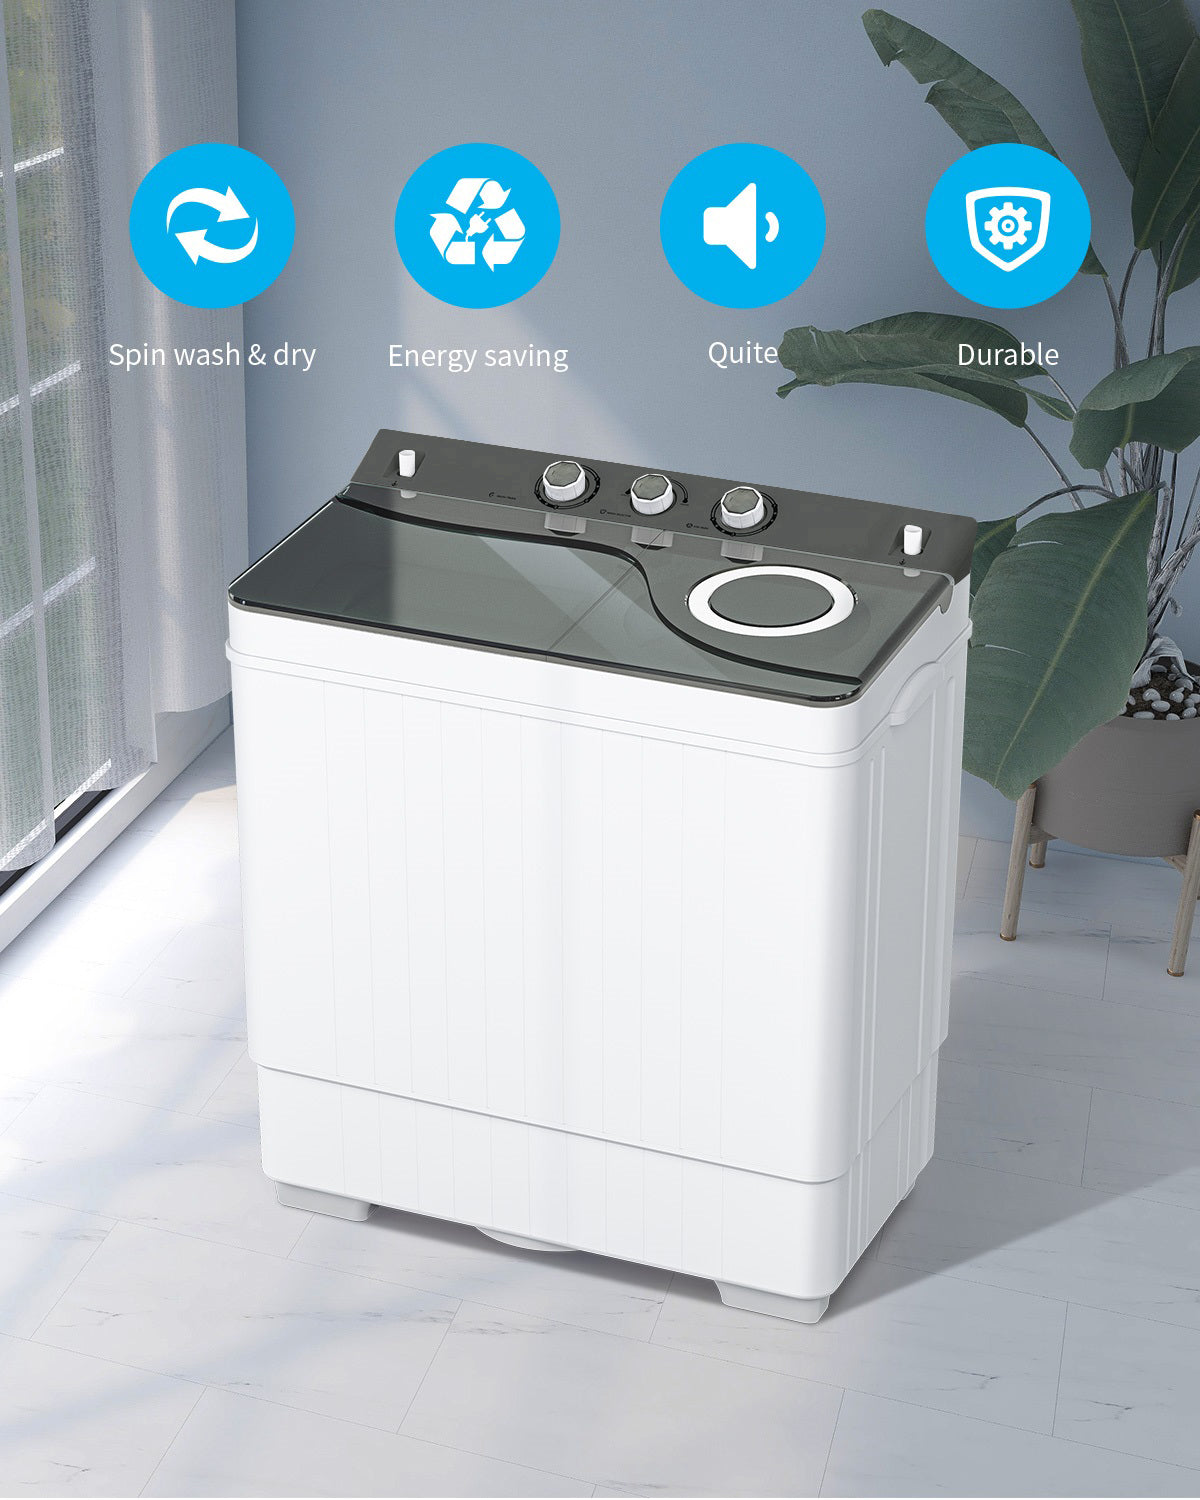 Twin Tube Washing Machine for Apartment, Dorms, RVs and Camping